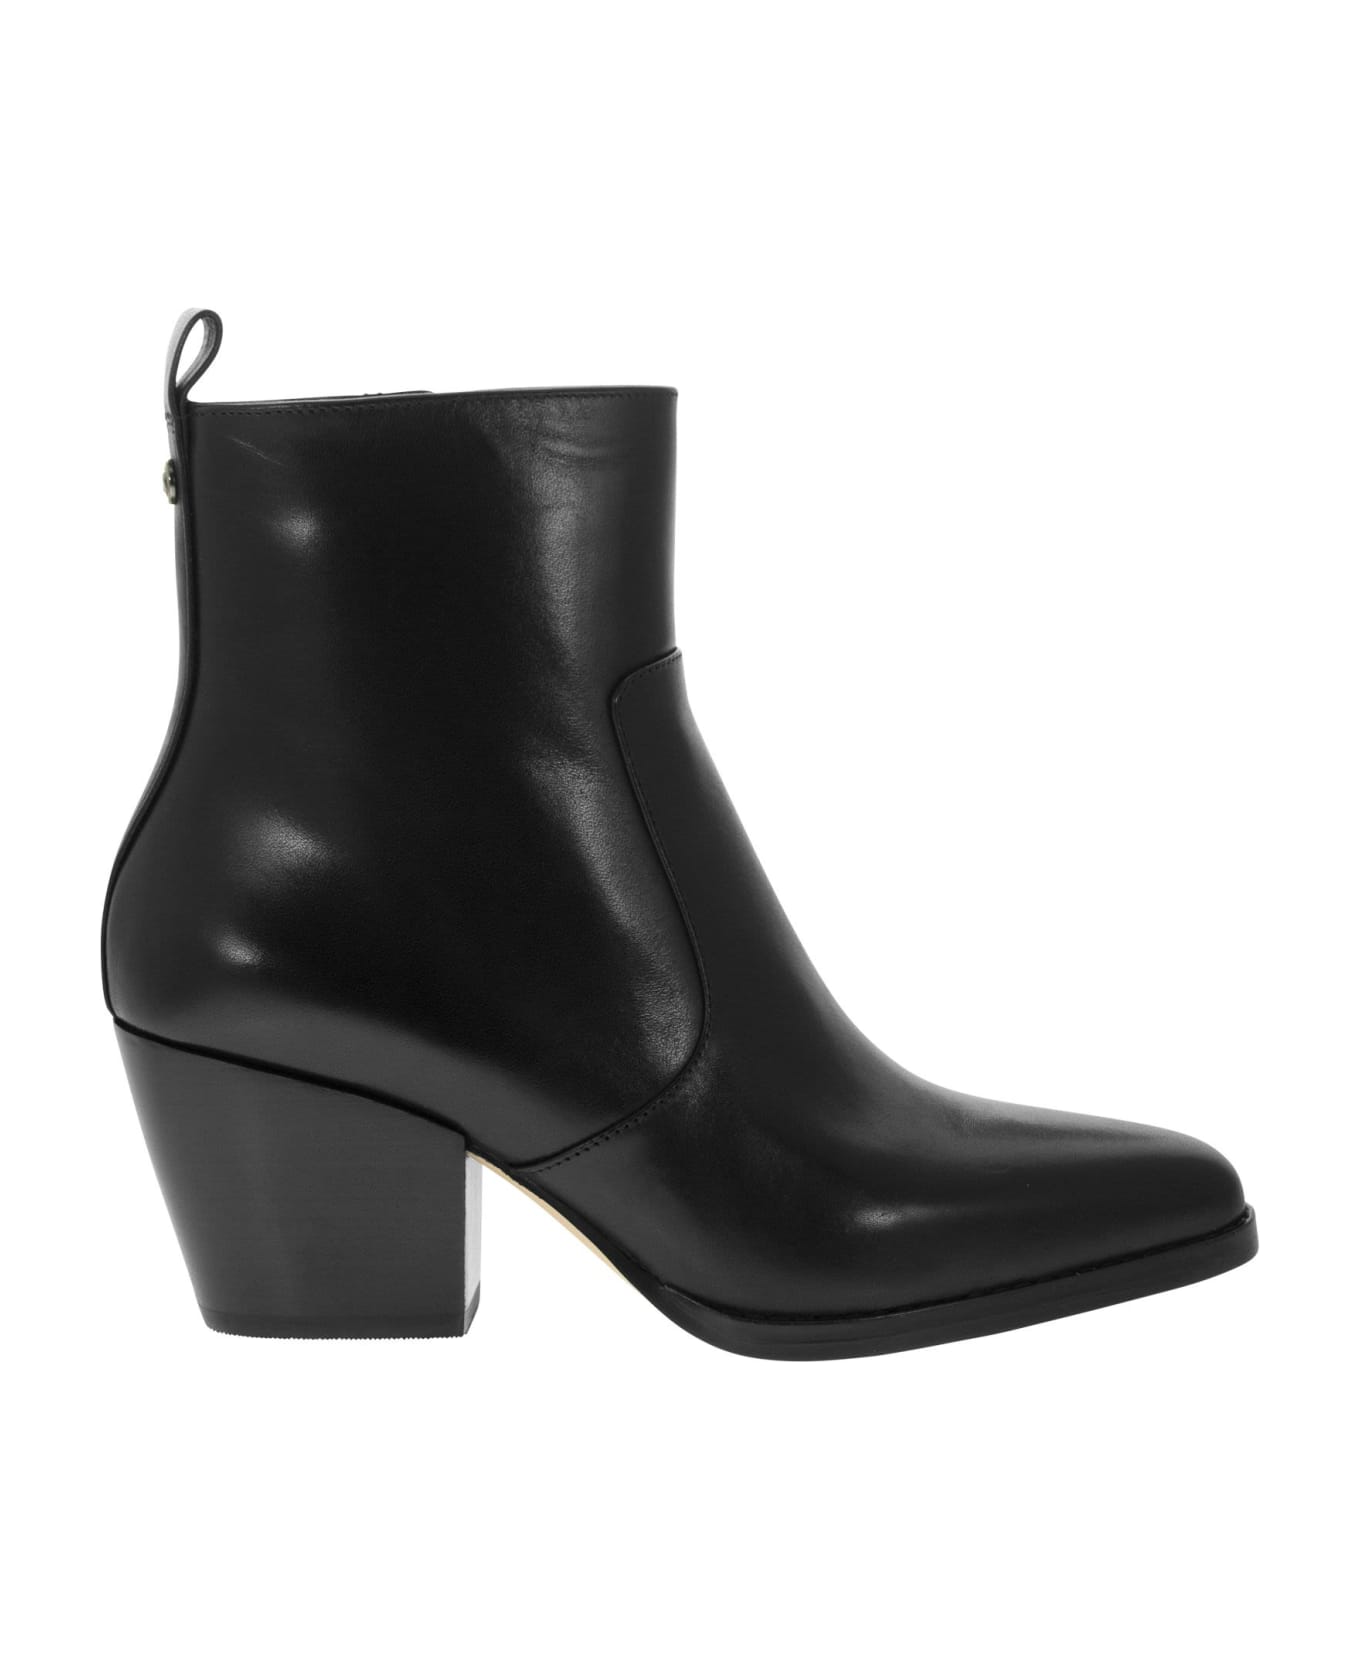 Michael Kors Harlow - Leather Ankle Boot - Black